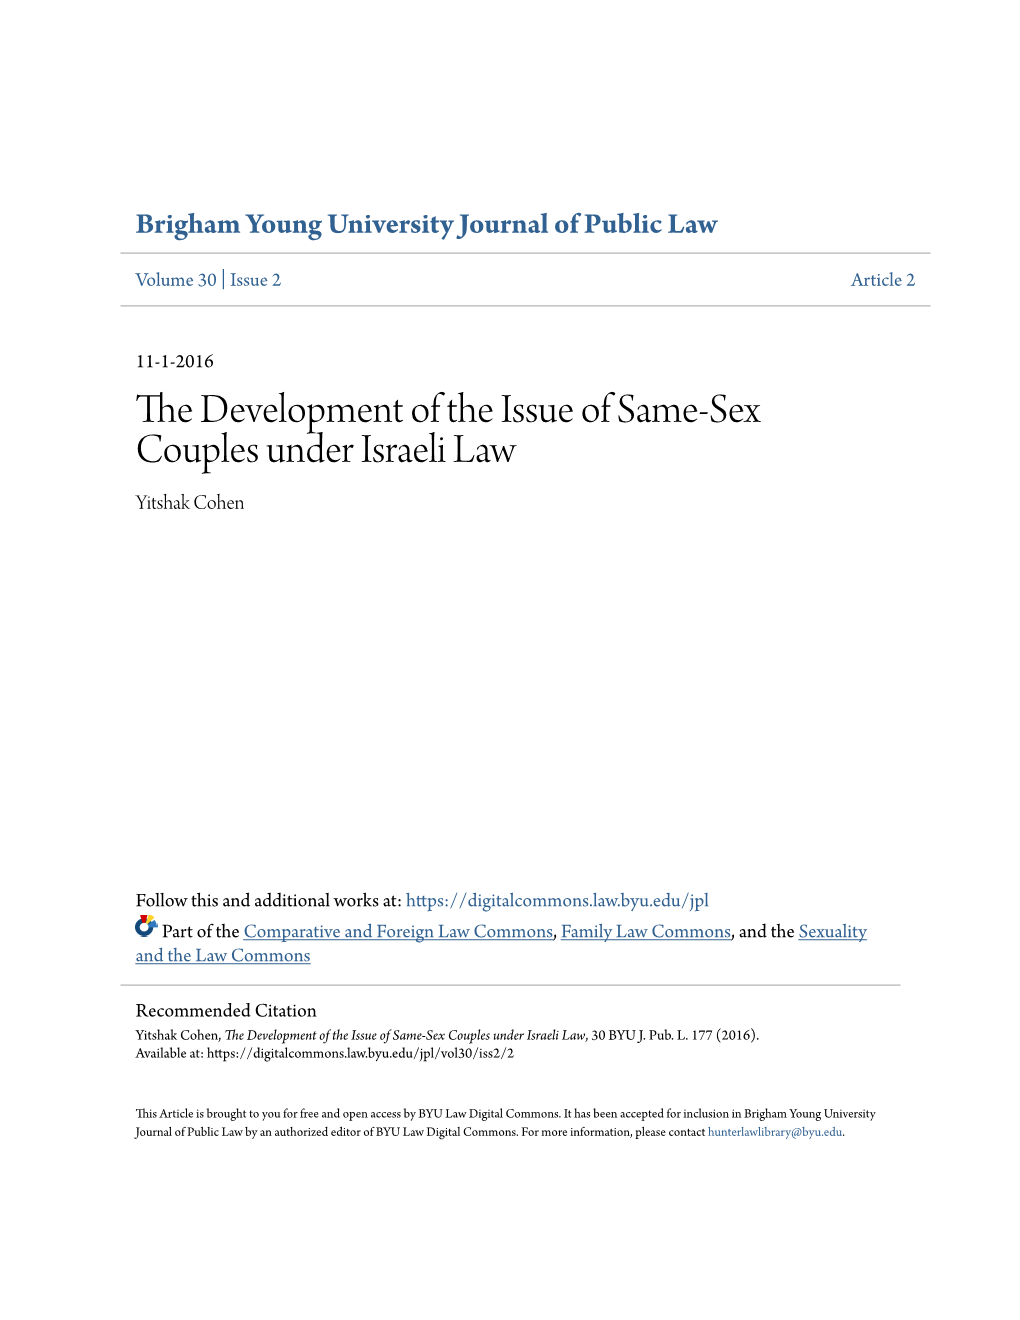 The Development of the Issue of Same-Sex Couples Under Israeli Law, 30 BYU J